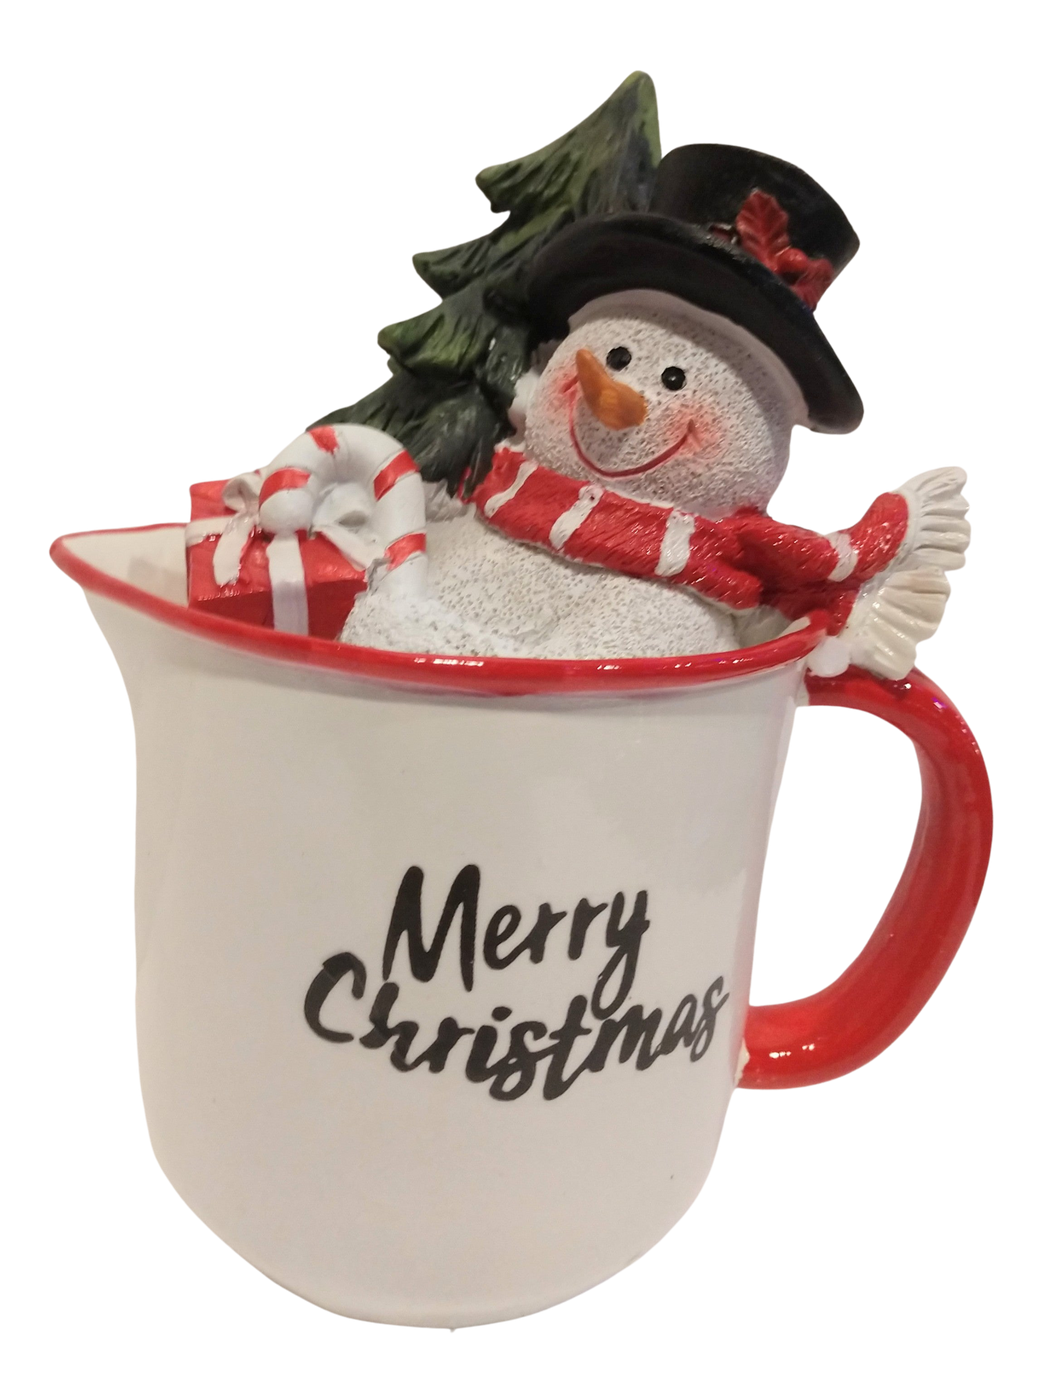 Snowman in A Merry Christmas Mug with Christmas Tree & Gifts